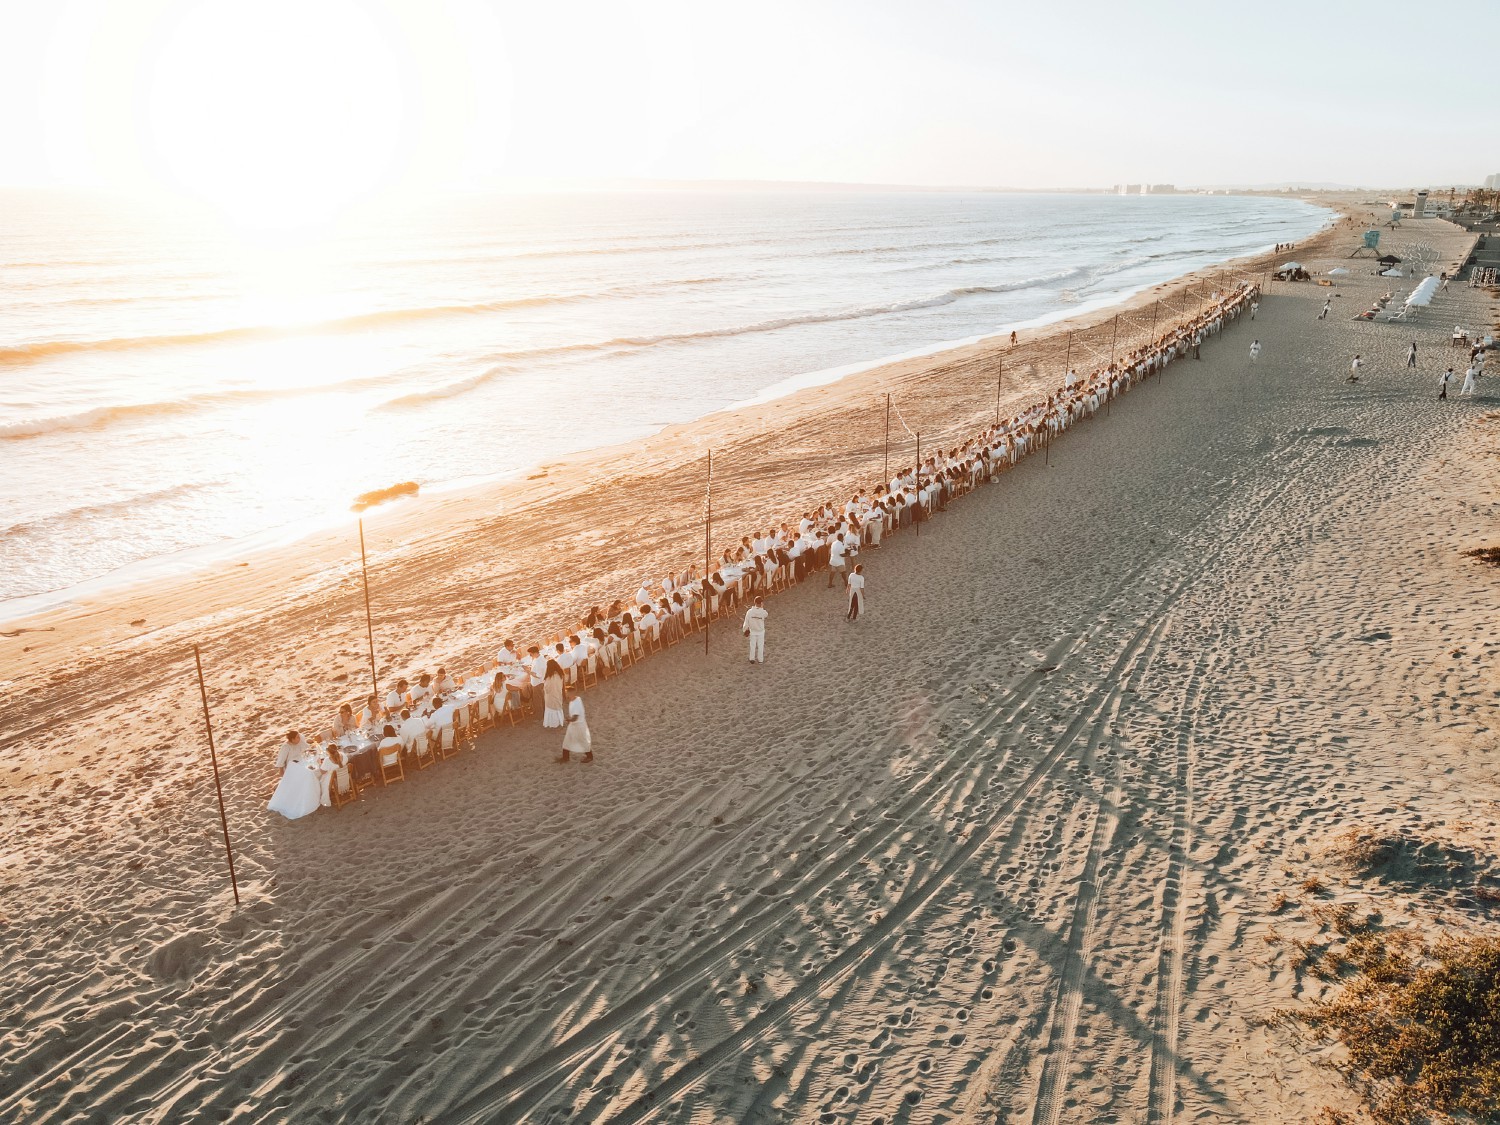 Our family dinners bring the company together, and our most recent saw 400+ people dine on the beach.